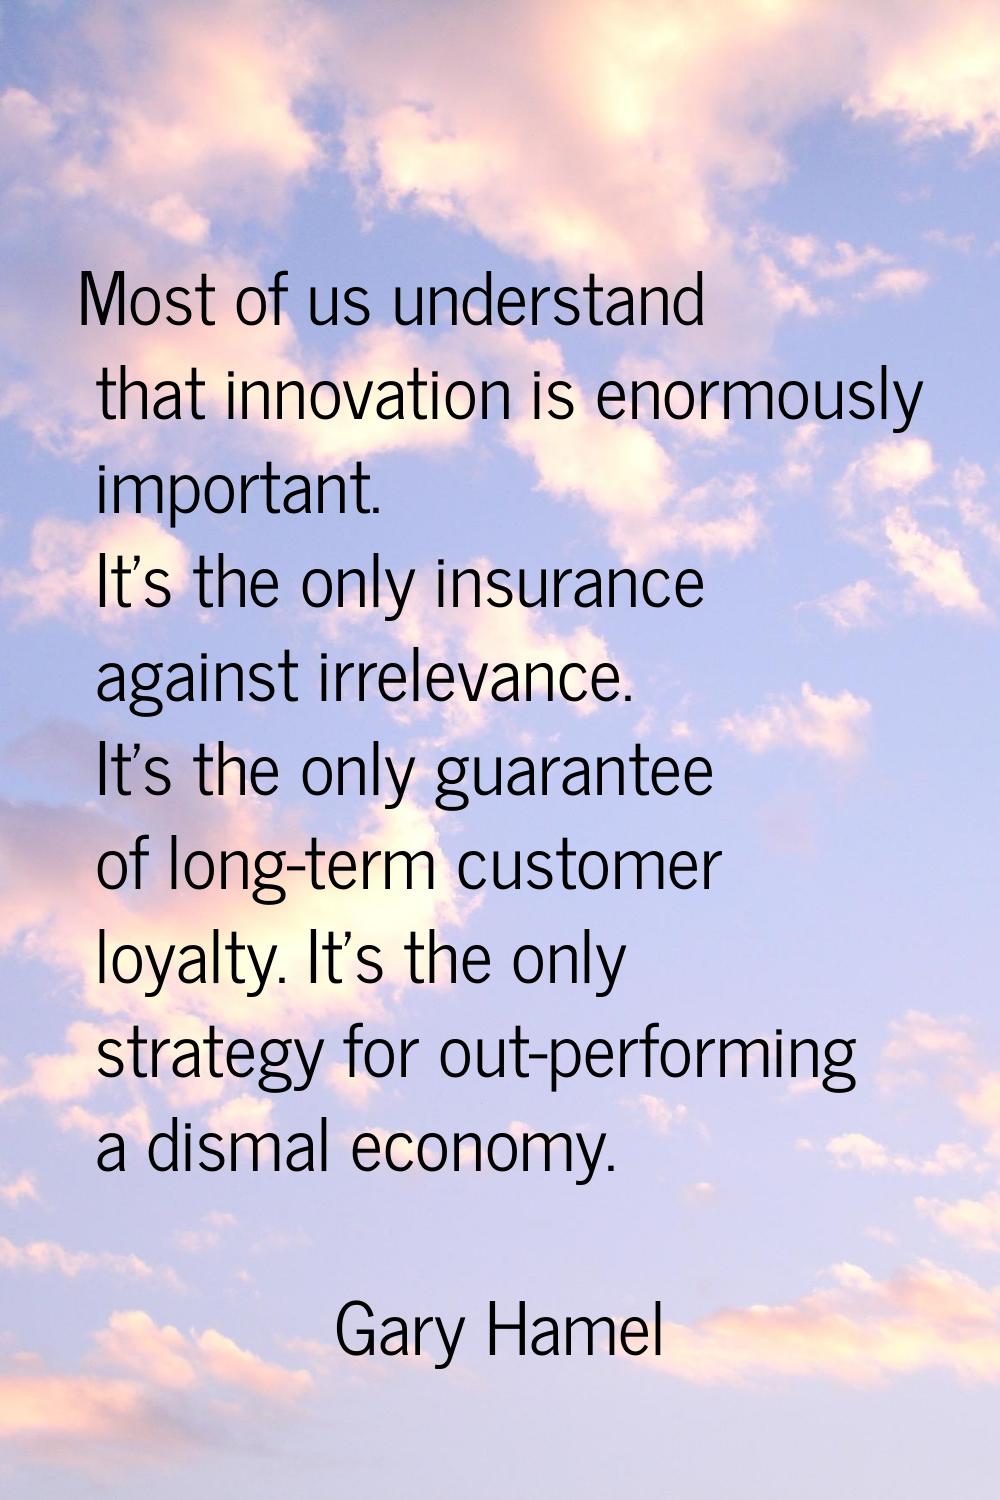 Most of us understand that innovation is enormously important. It's the only insurance against irre